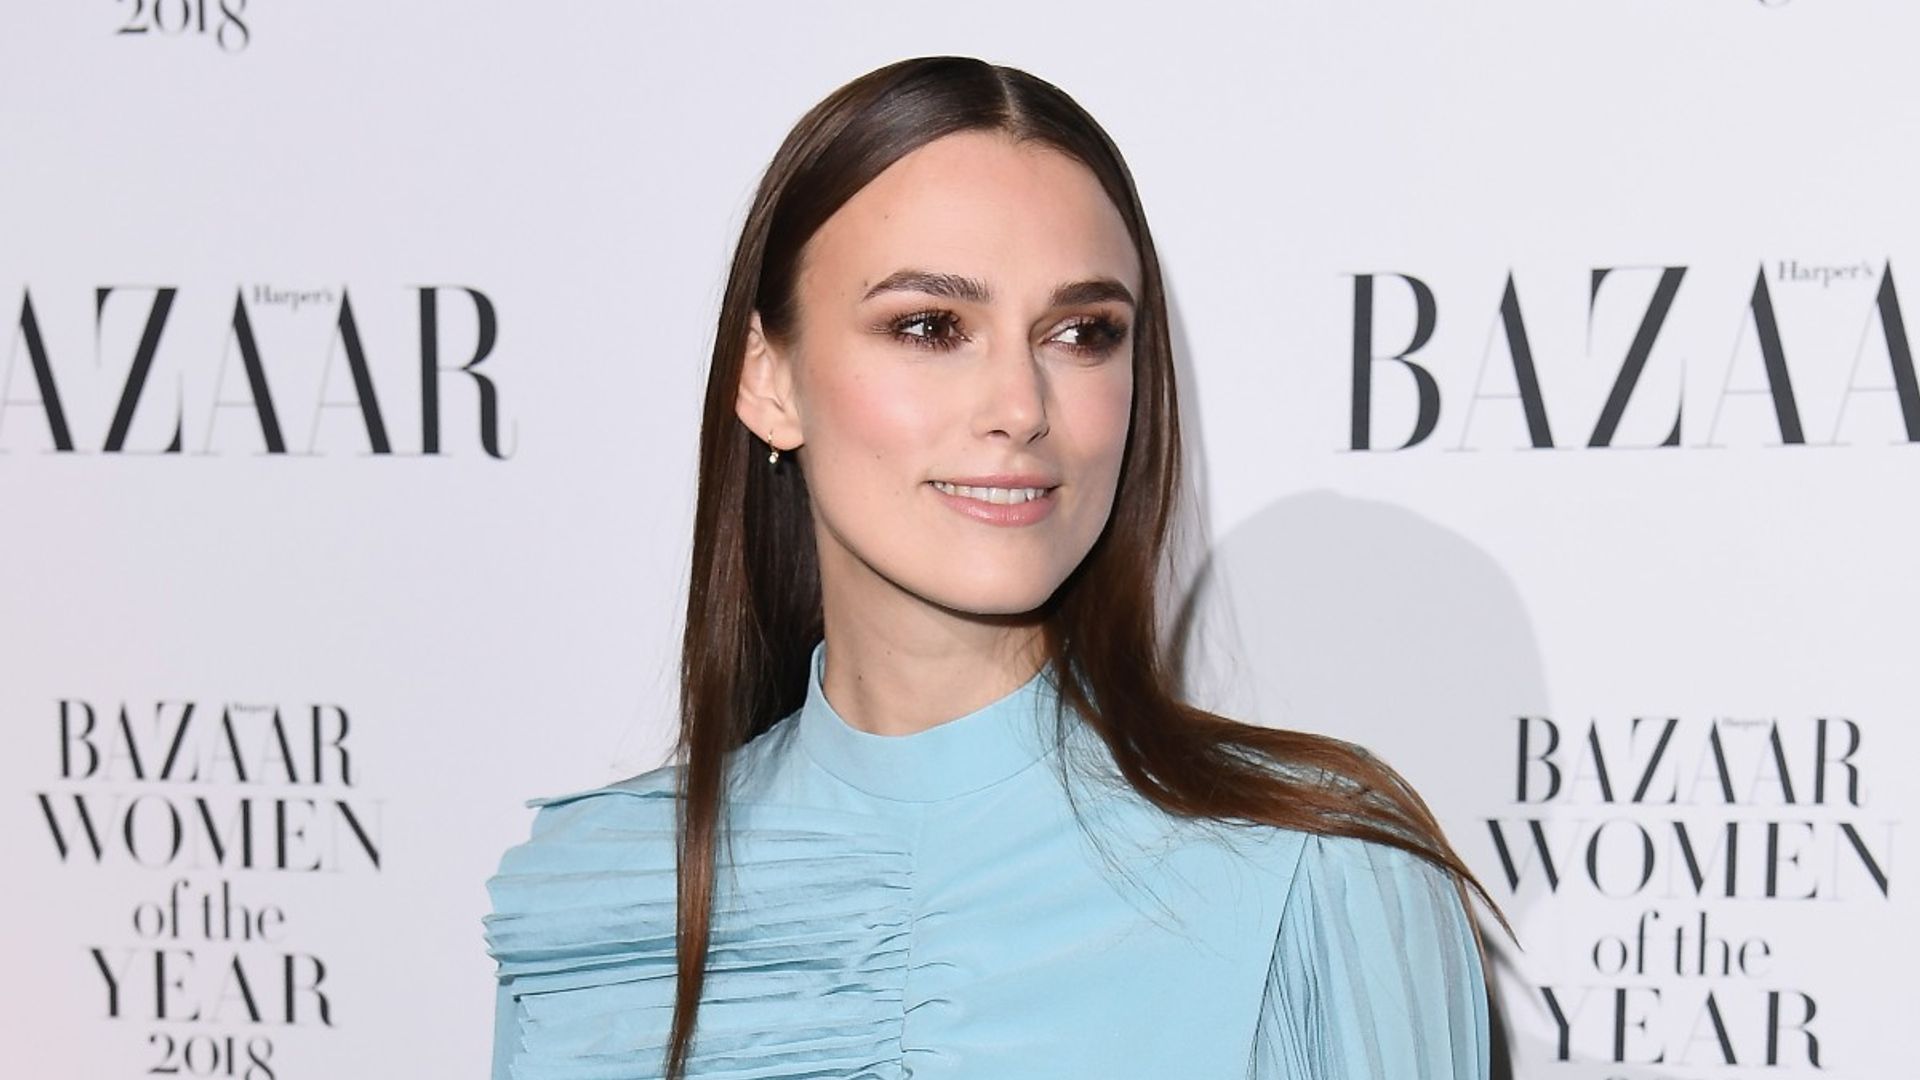 Why Keira Knightley was forced to drop out of The Essex Serpent 